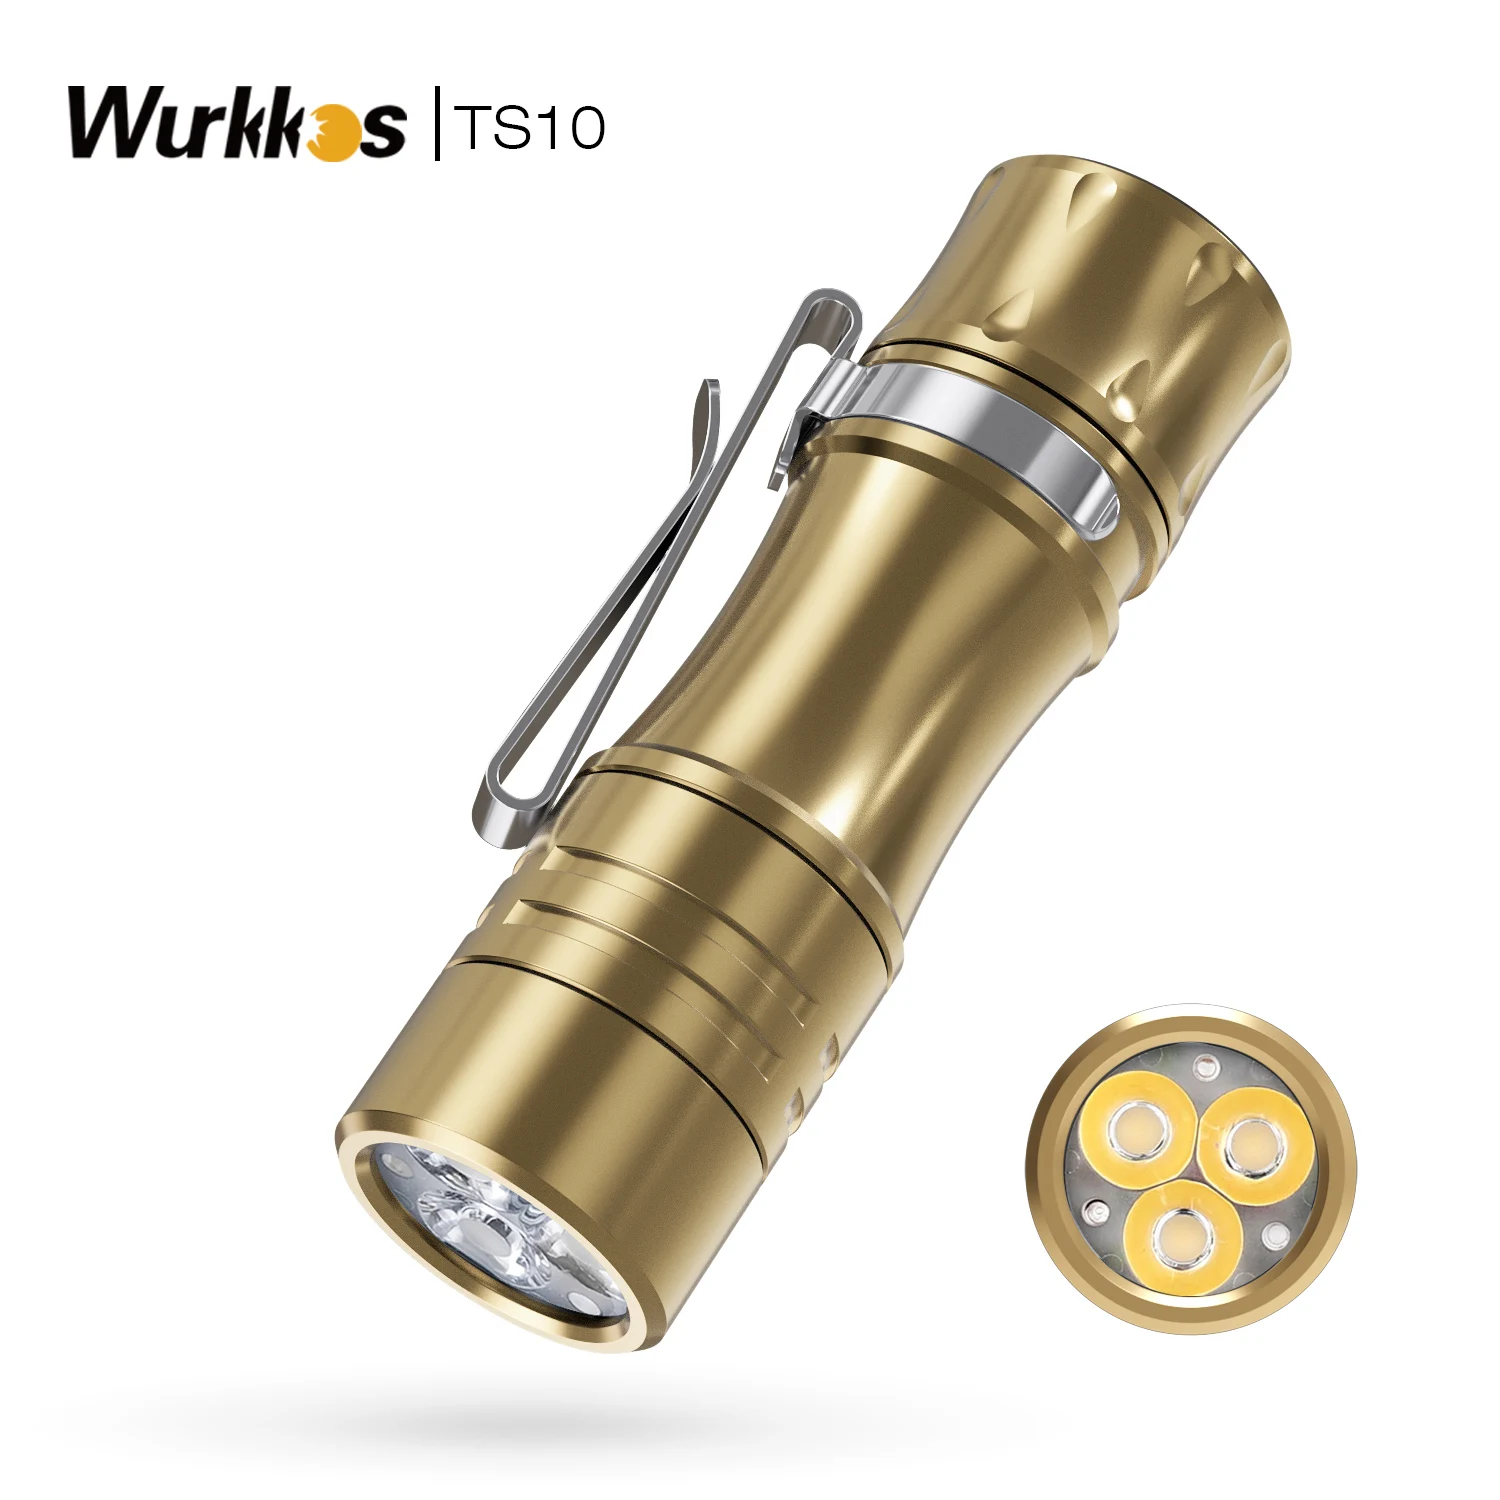 Wurkkos TS10 Powerful Mini 14500 EDC Flashlight with 3* 90 CRI LEDs and Single Color Aux 1400LM Pocket Torch Anduril 2.0